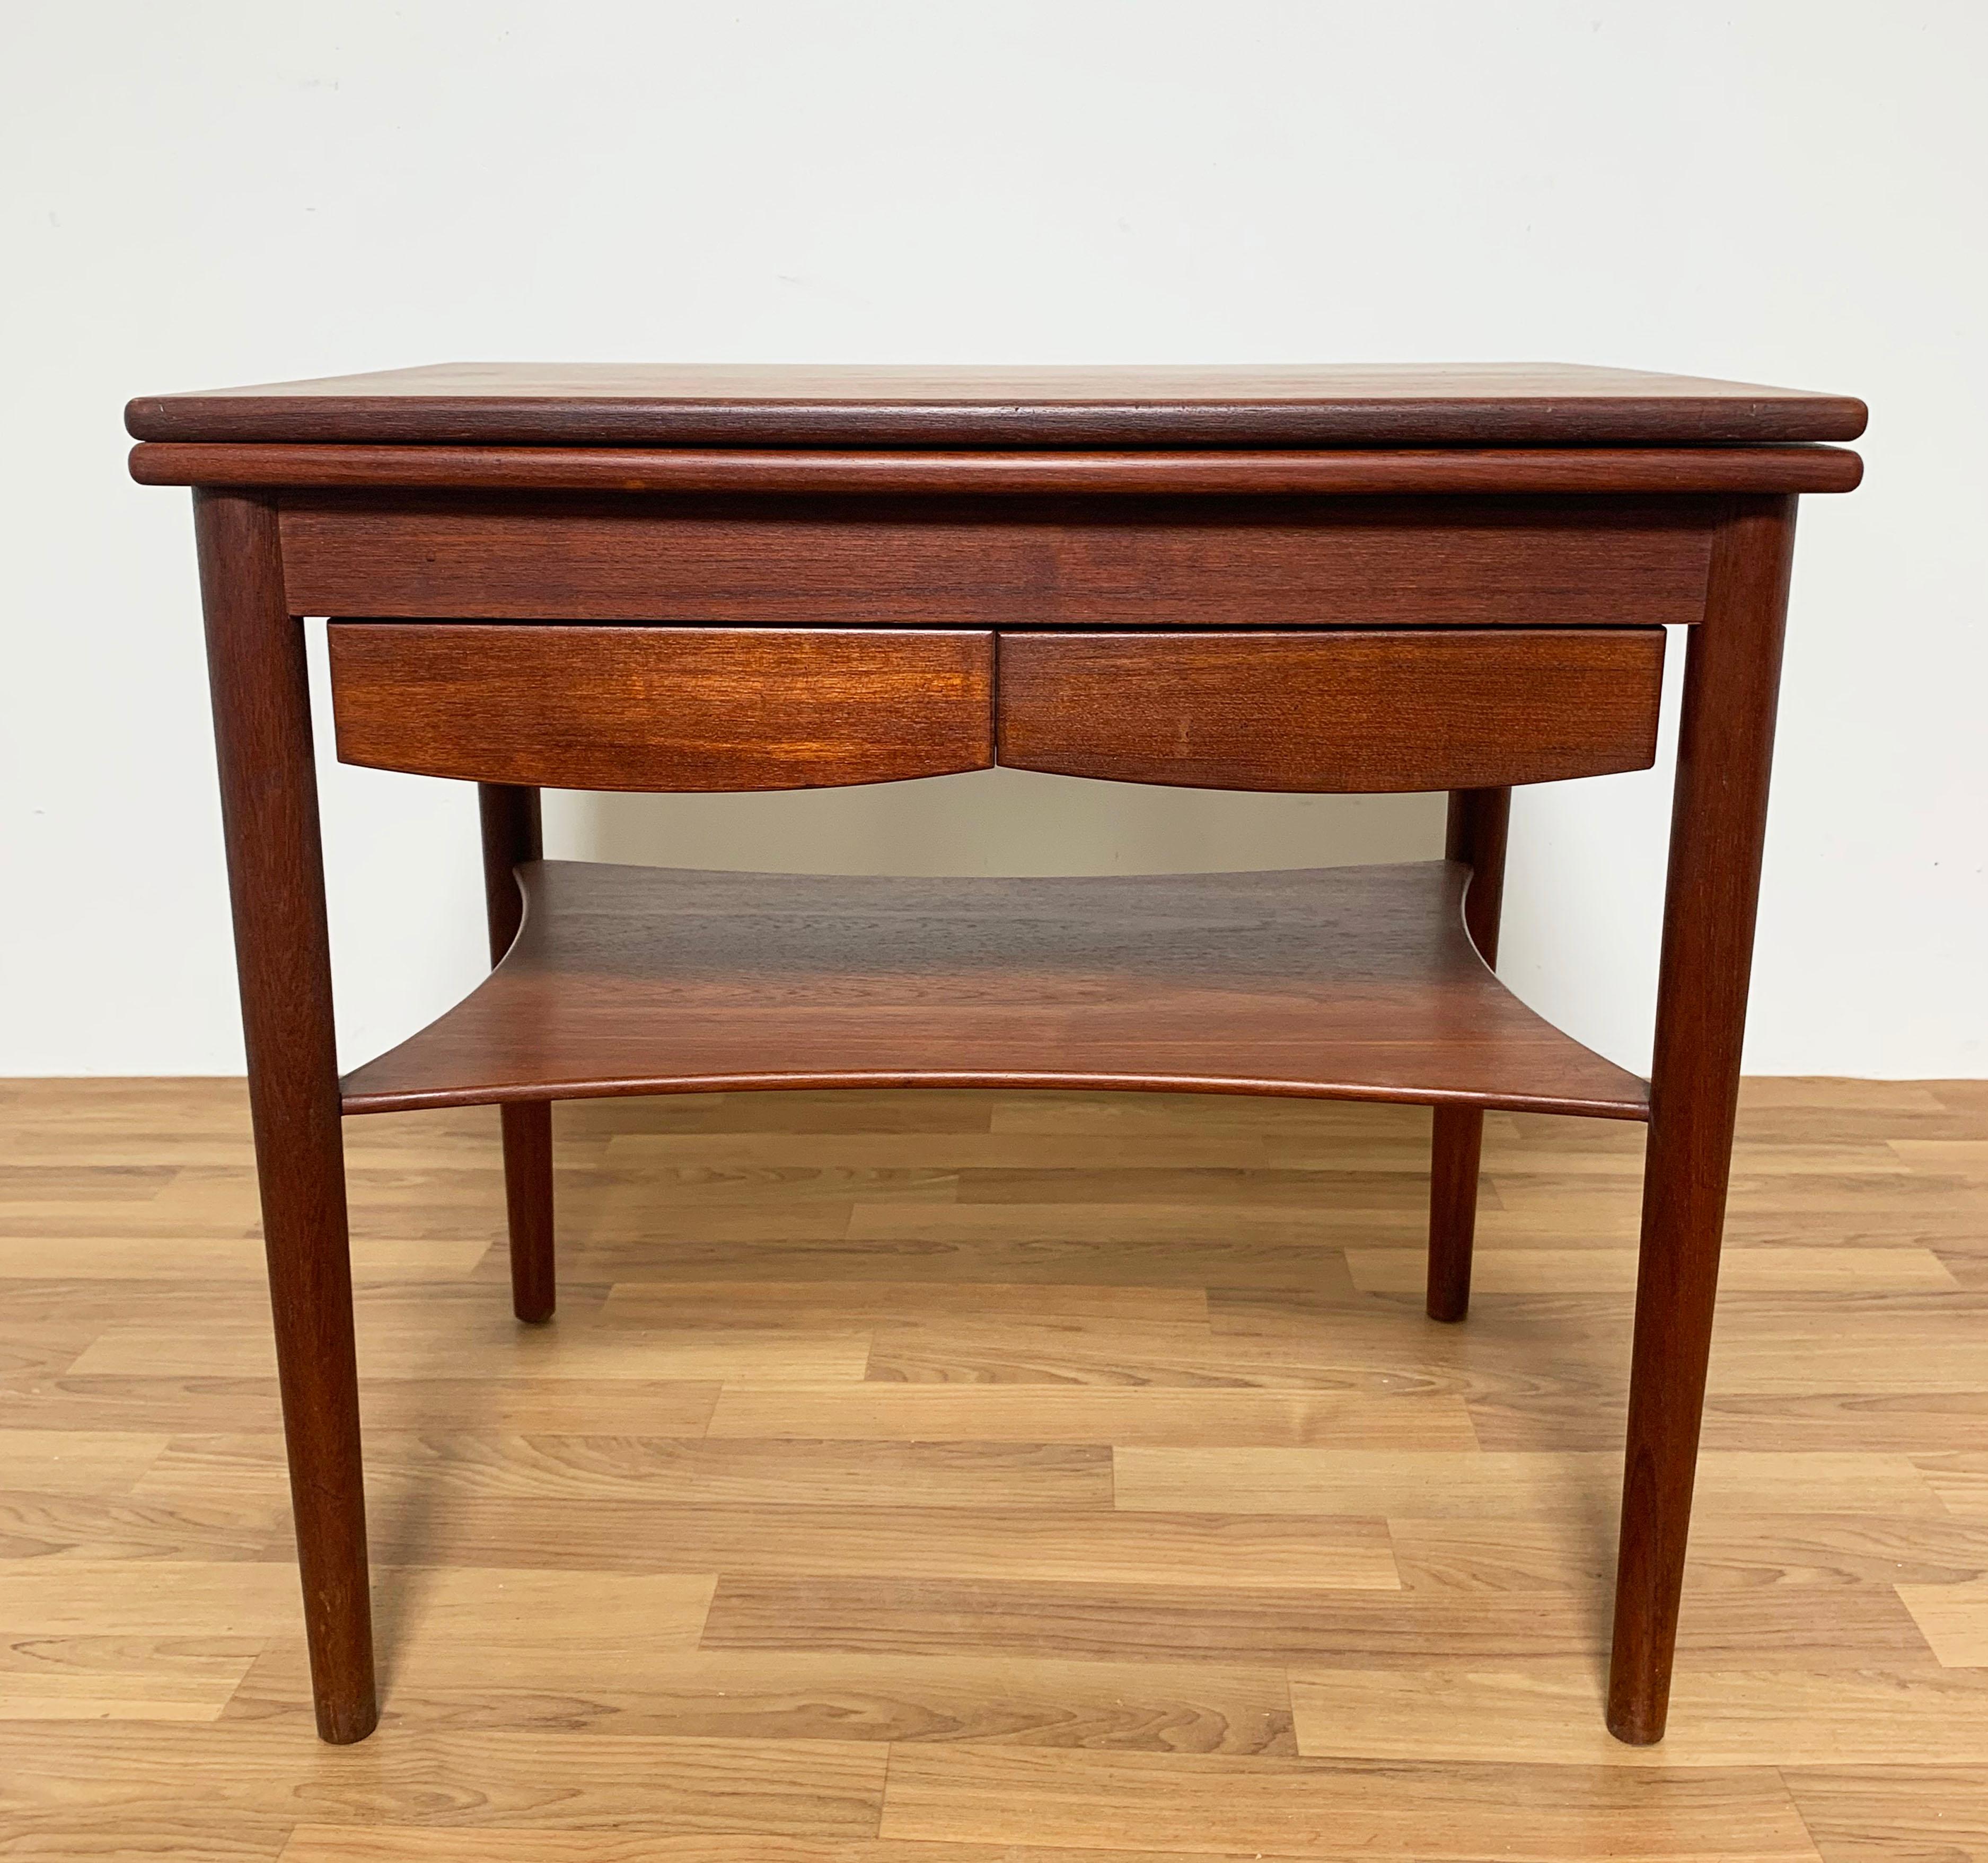 A rare teak side table with flip top and under-drawers, Model 149, designed by Borge Mogensen for Soborg Mobelfabrik, Denmark, ca. 1950s.
In the closed position, this measures 26